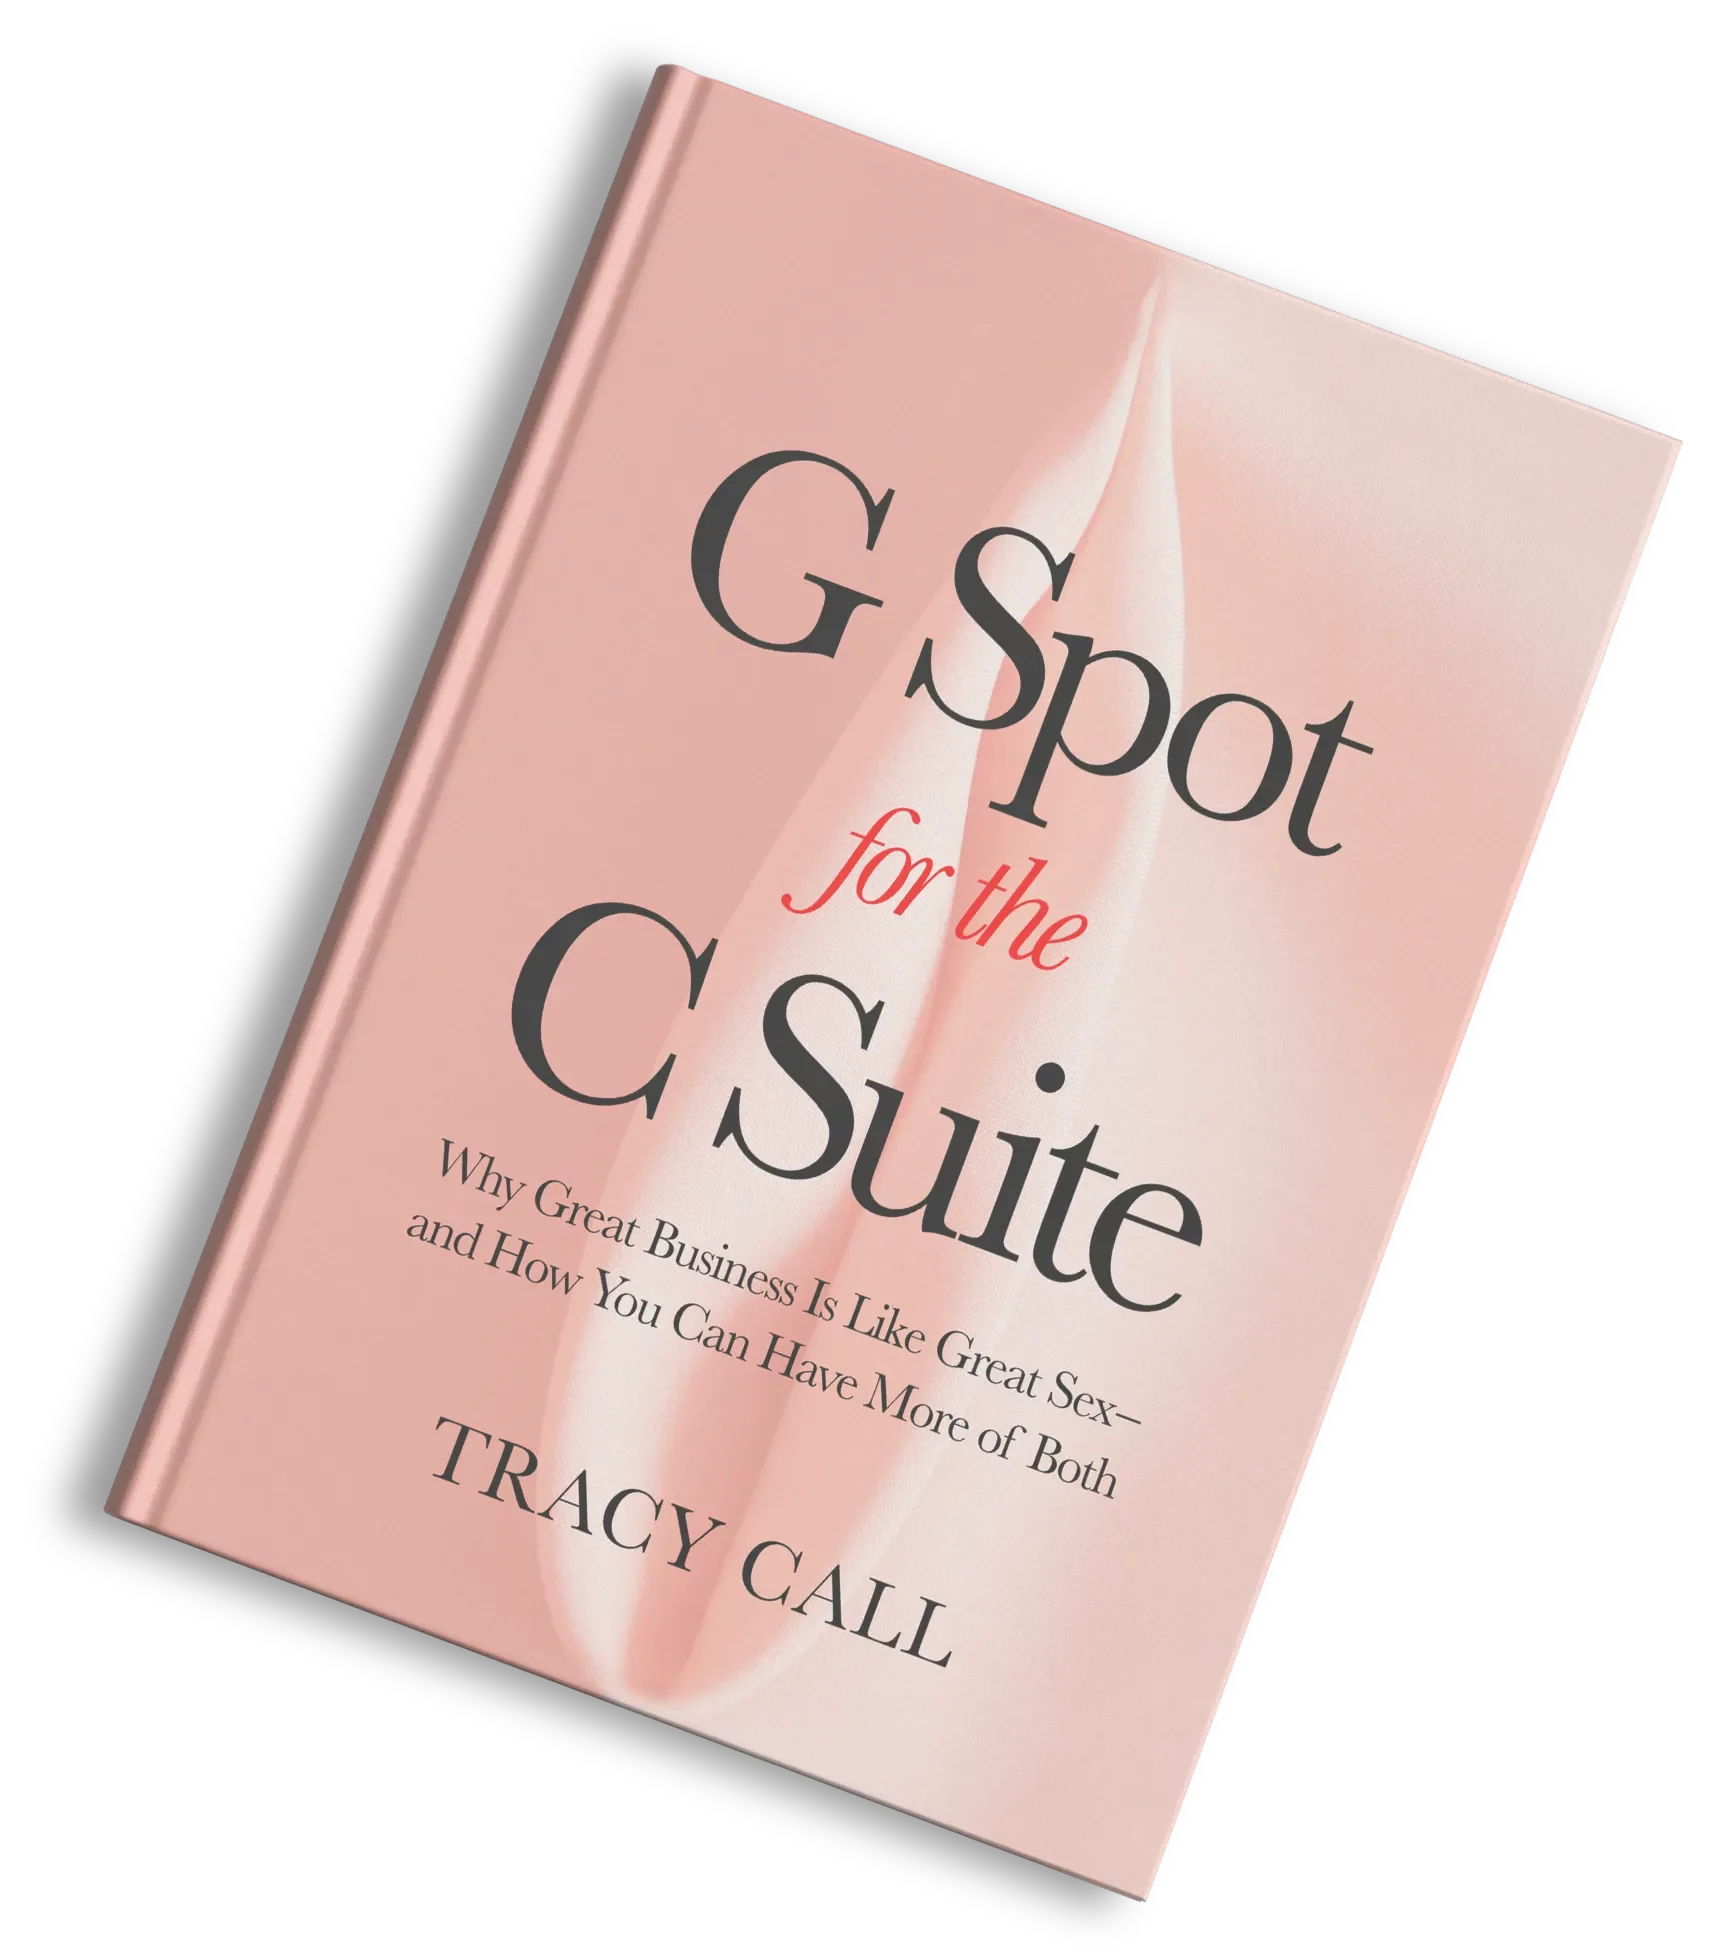 G Spot for the C Suite book